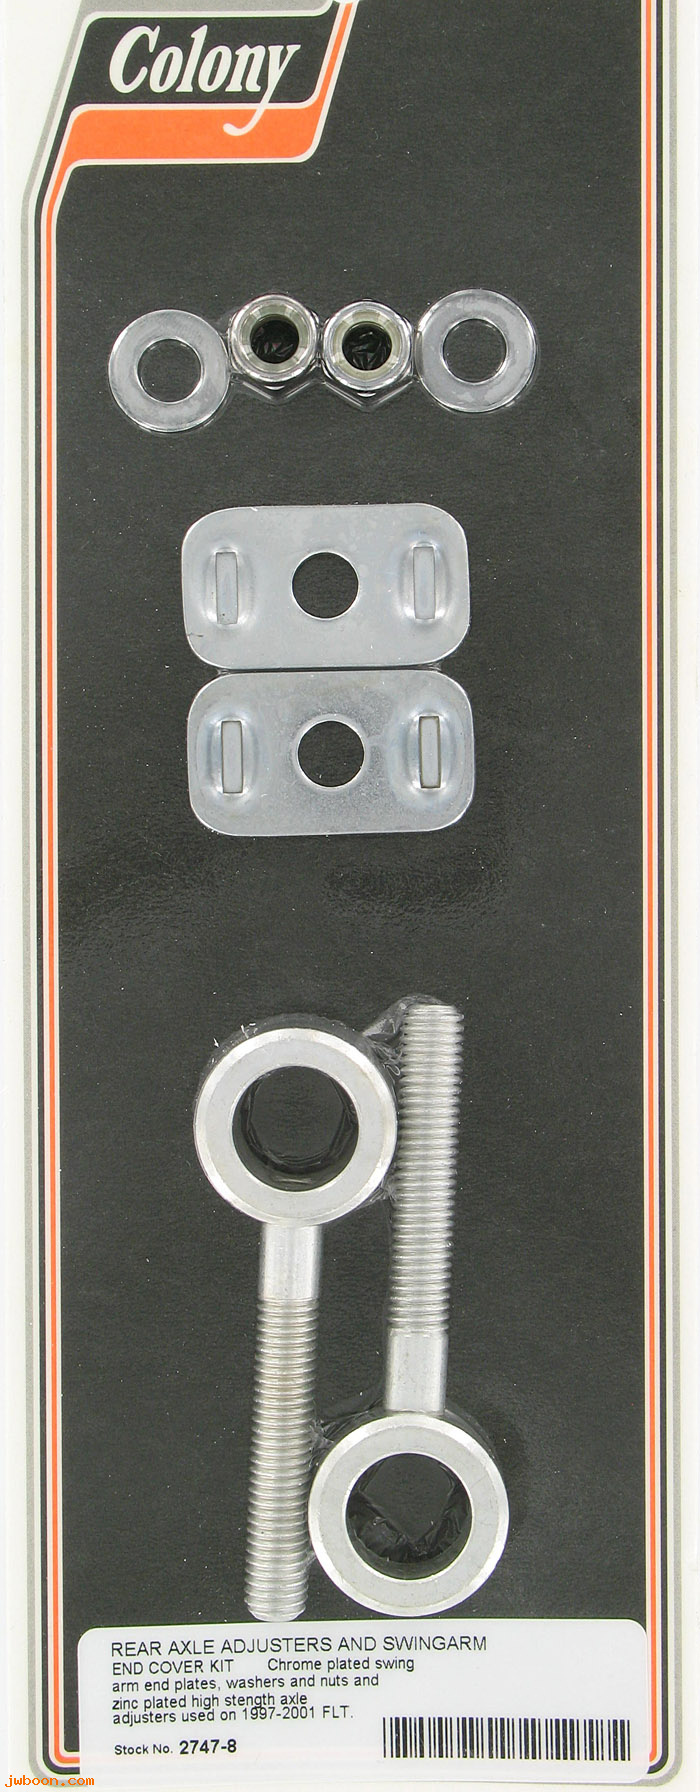 C 2747-8 (): Rear axle adjusters and swingarm end cover kit - FLT '97-'01